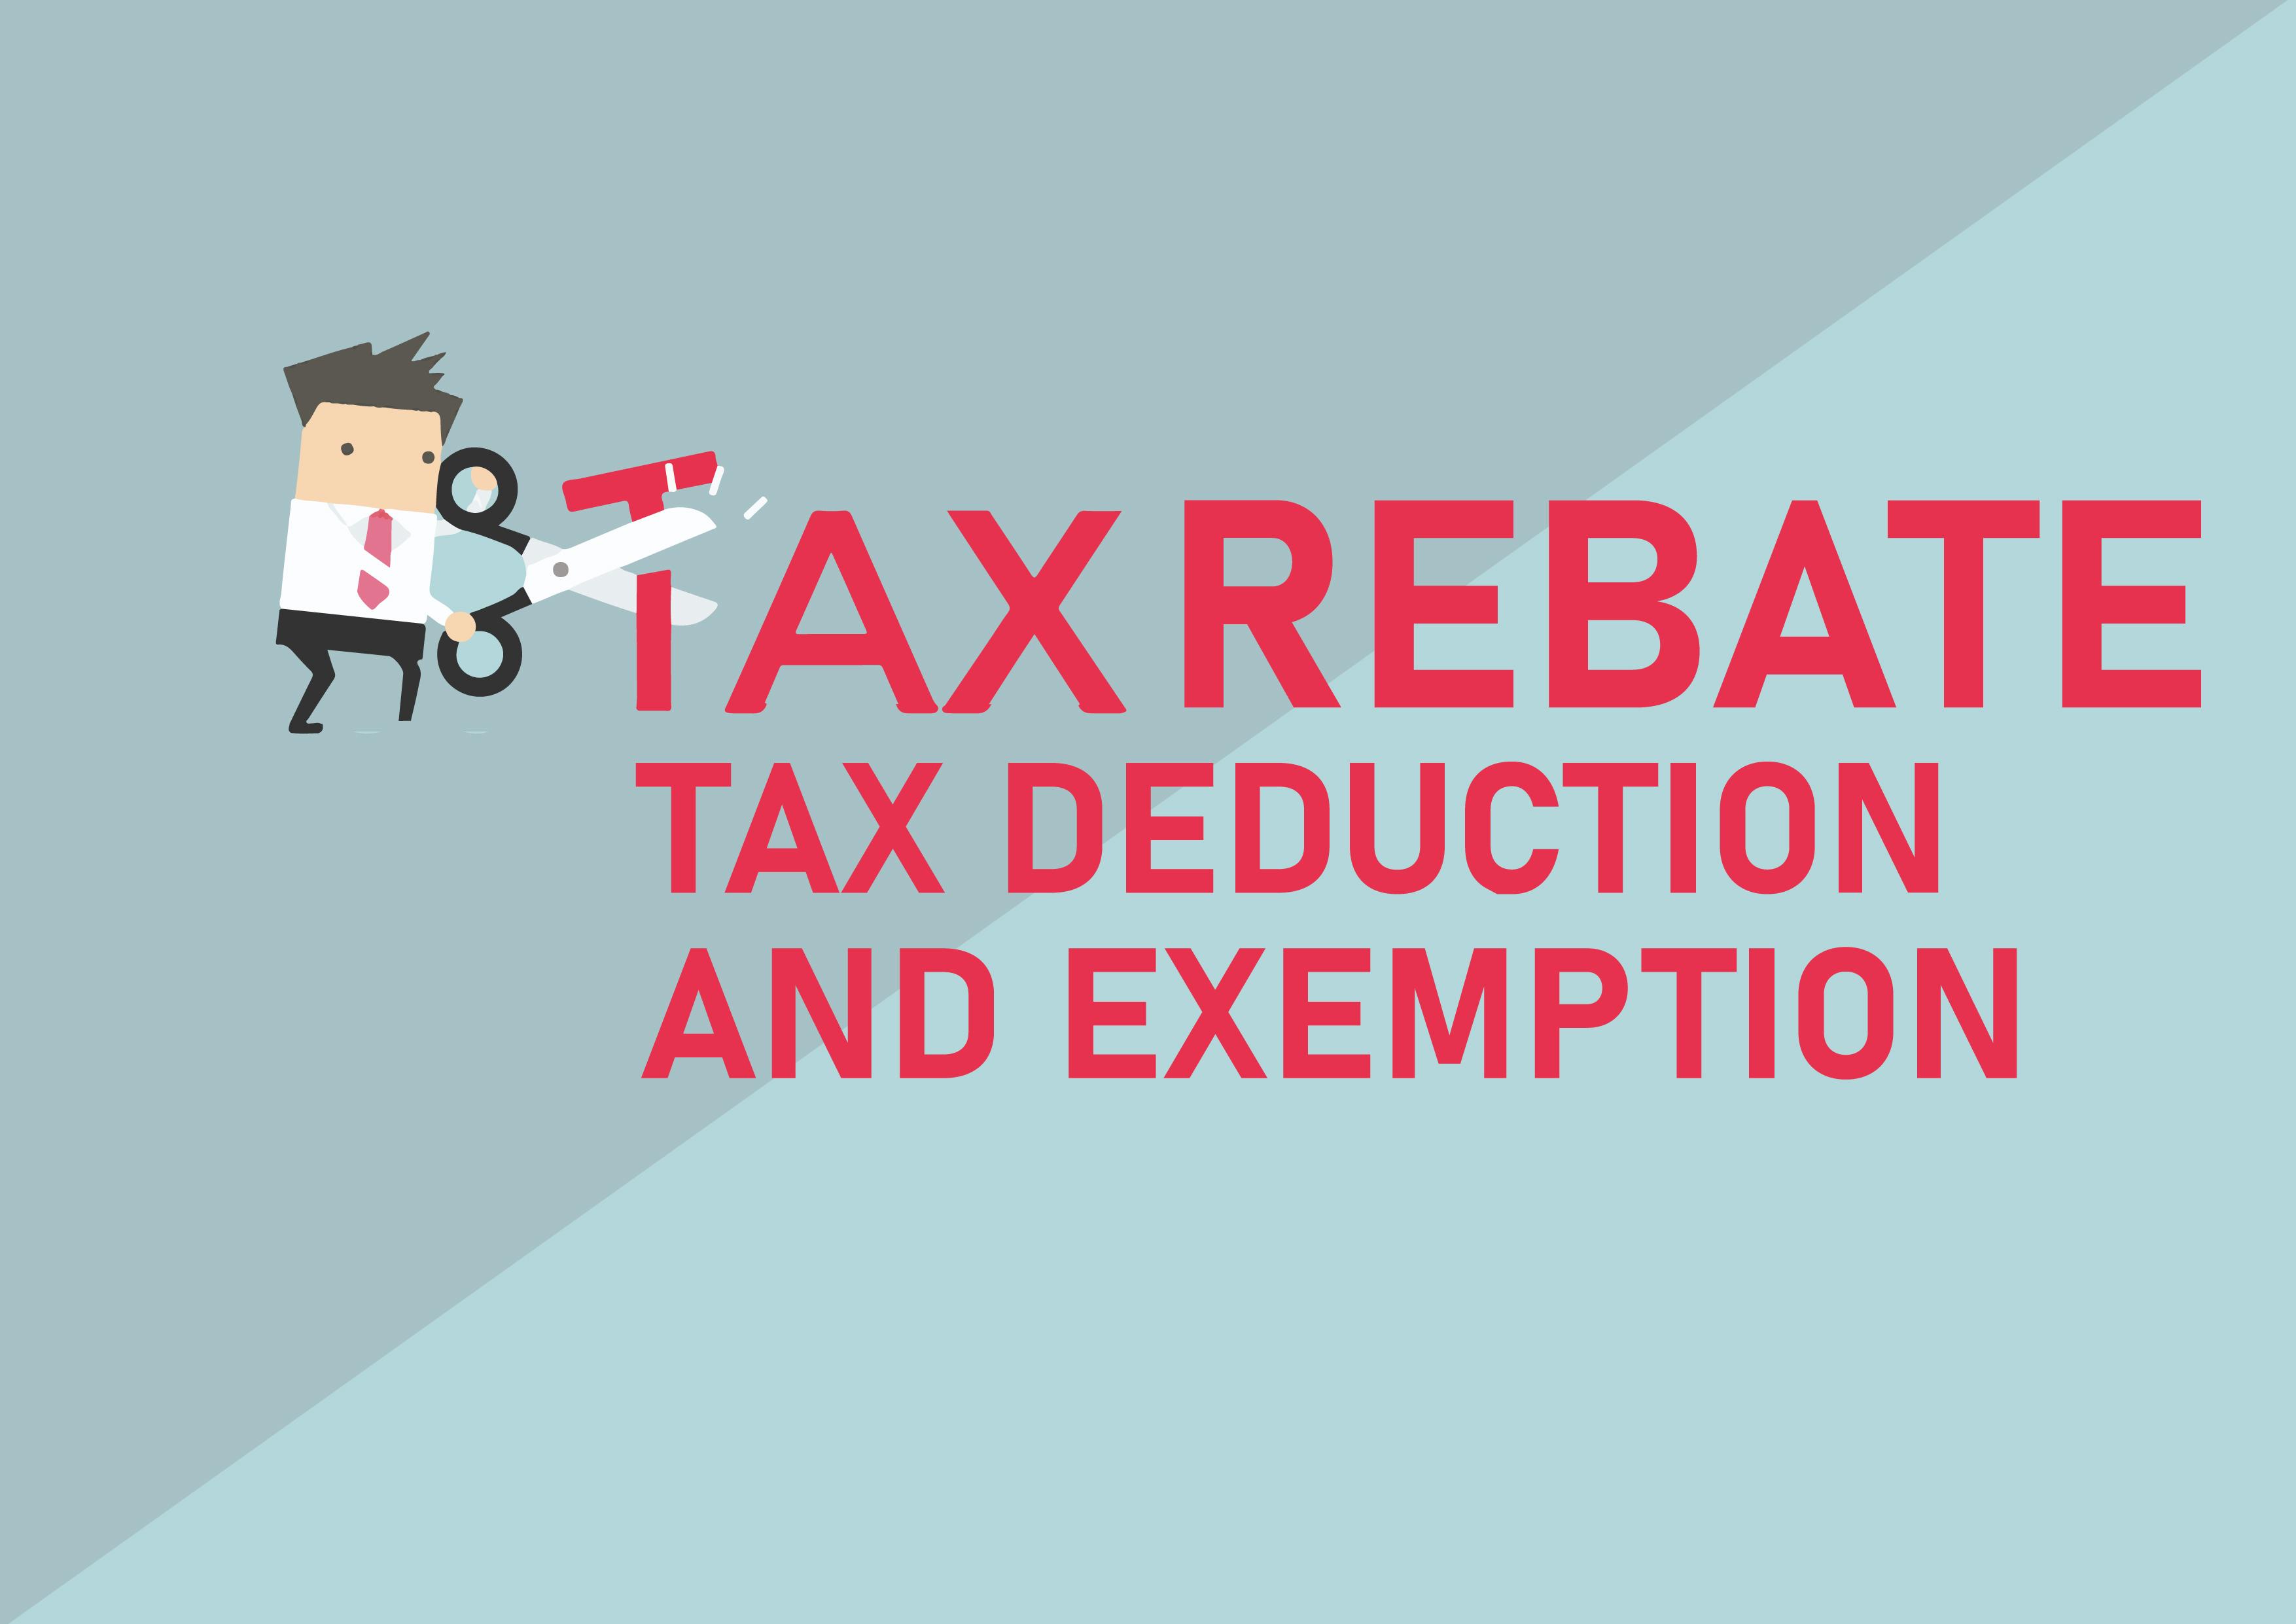 Difference Between Income Tax Rebate, Tax Deduction and Exemption - Tax and accounting services for domestic and overseas Indians | GKMTax.in